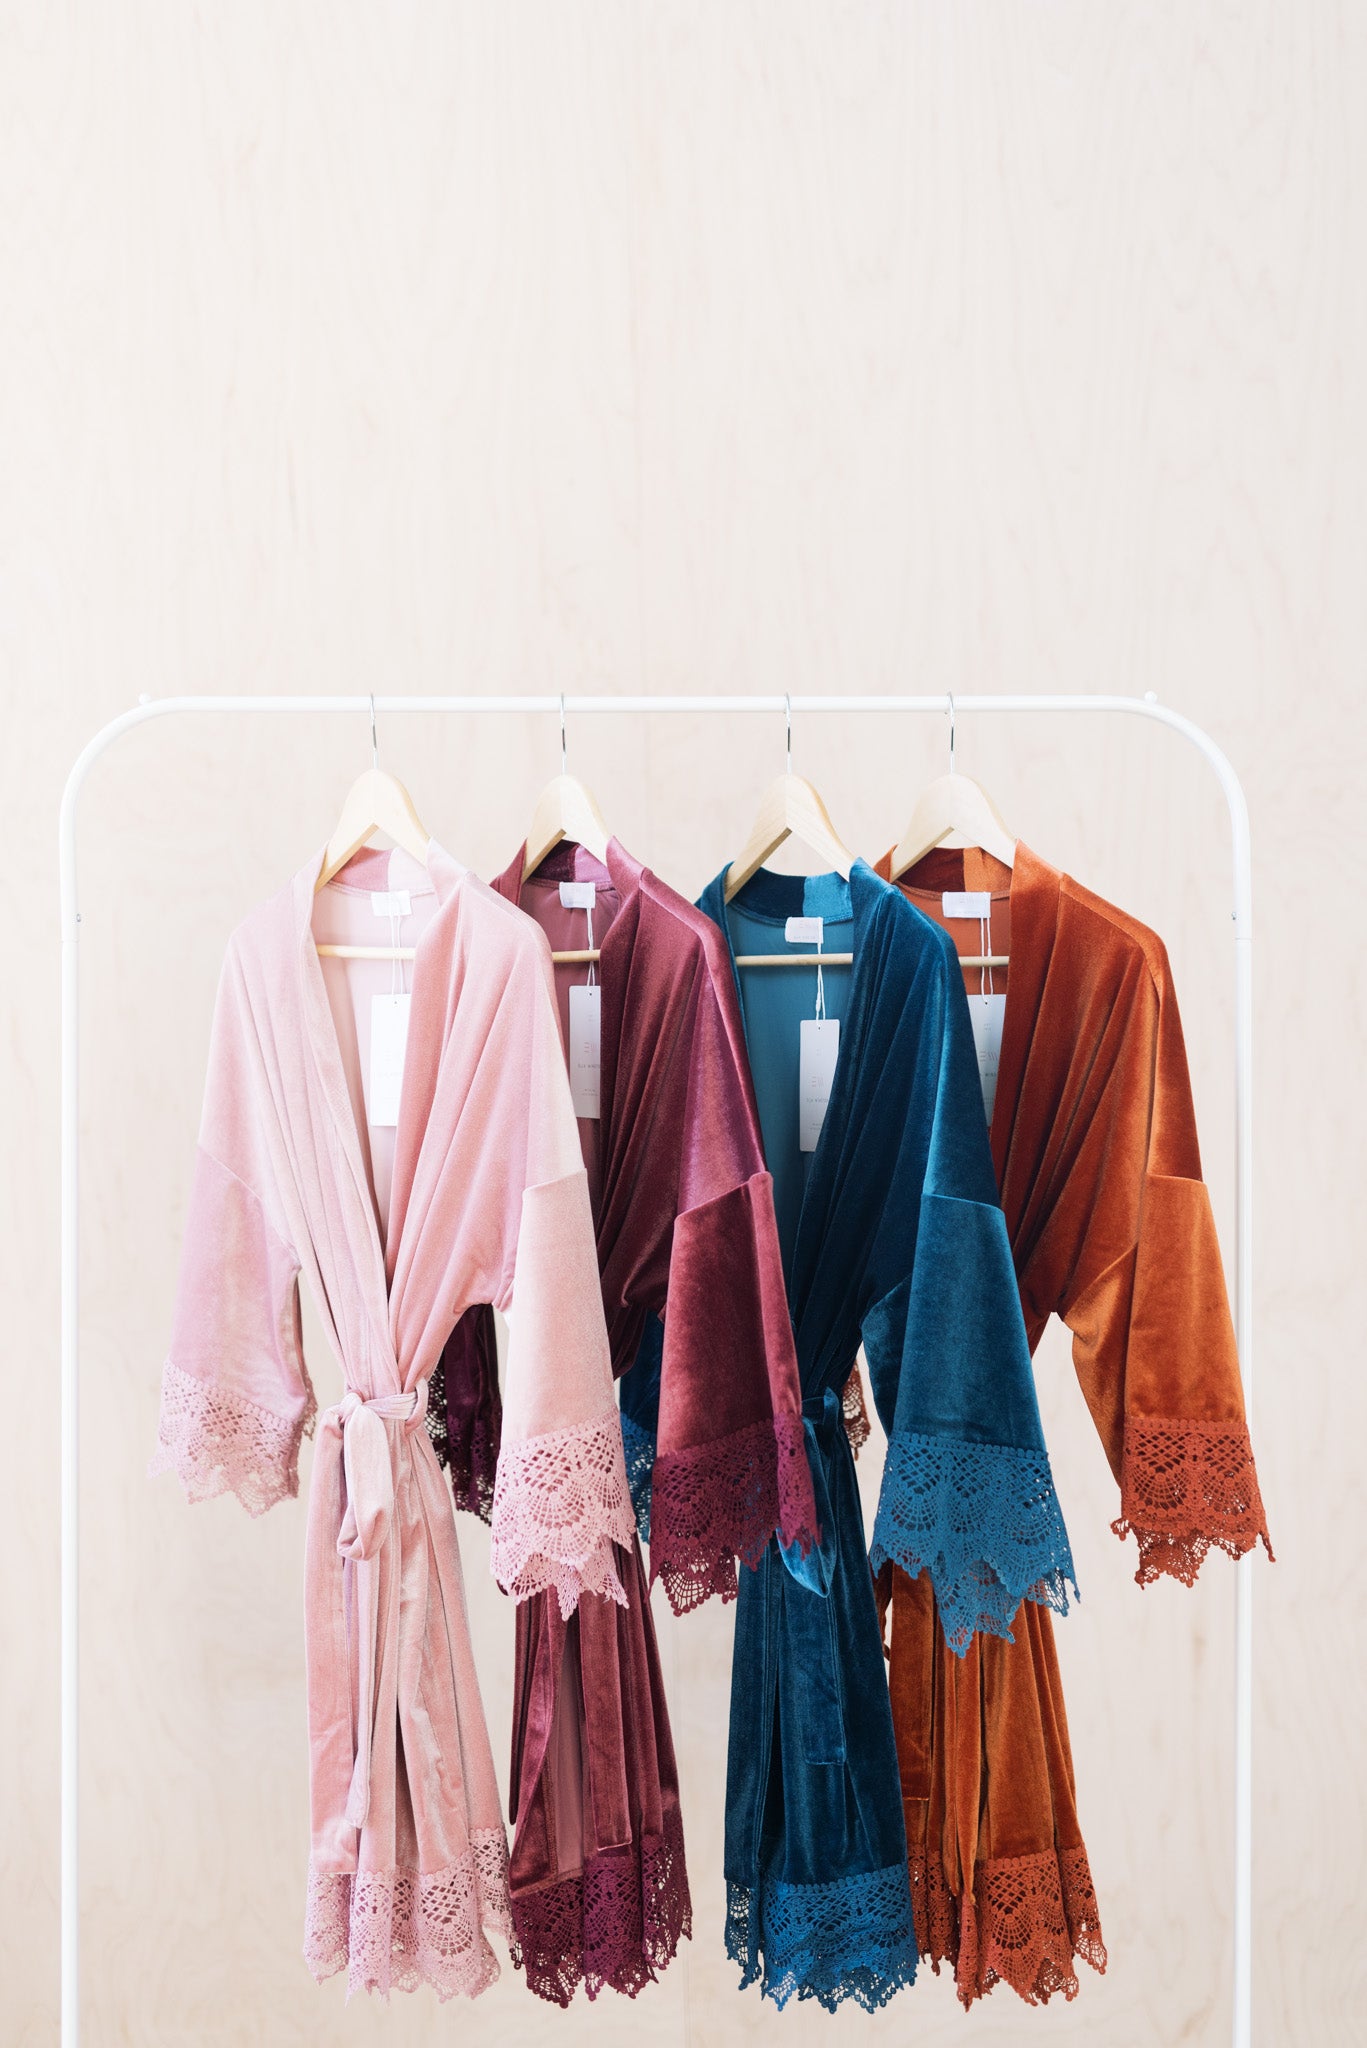 Velvet and Lace Robes in Four Colors, Rose, Mauve, Dusty Blue, Burnt Orange